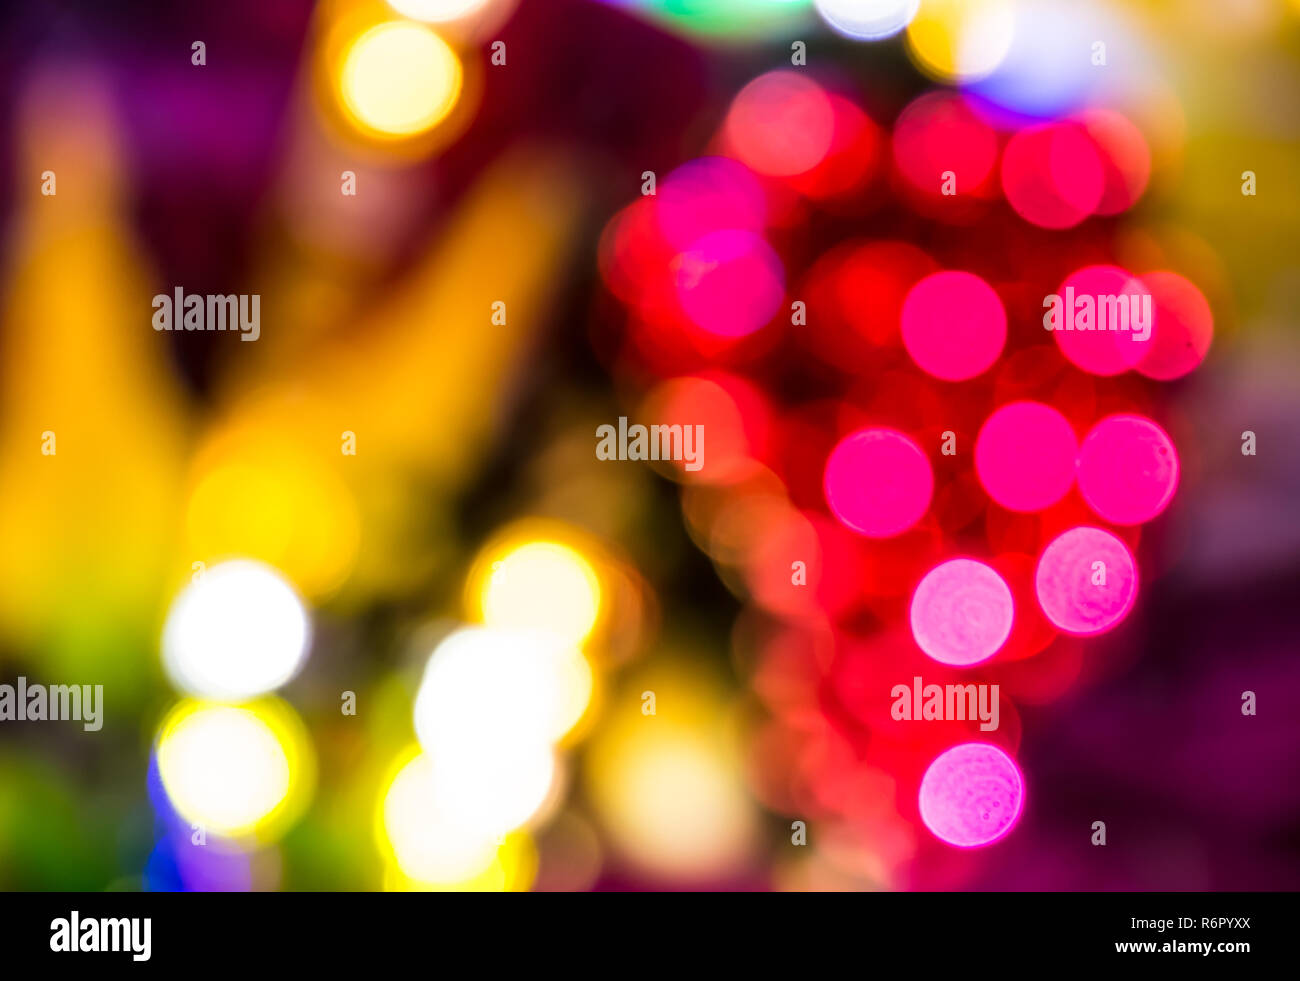 Abstract defocused christmas light background Stock Photo